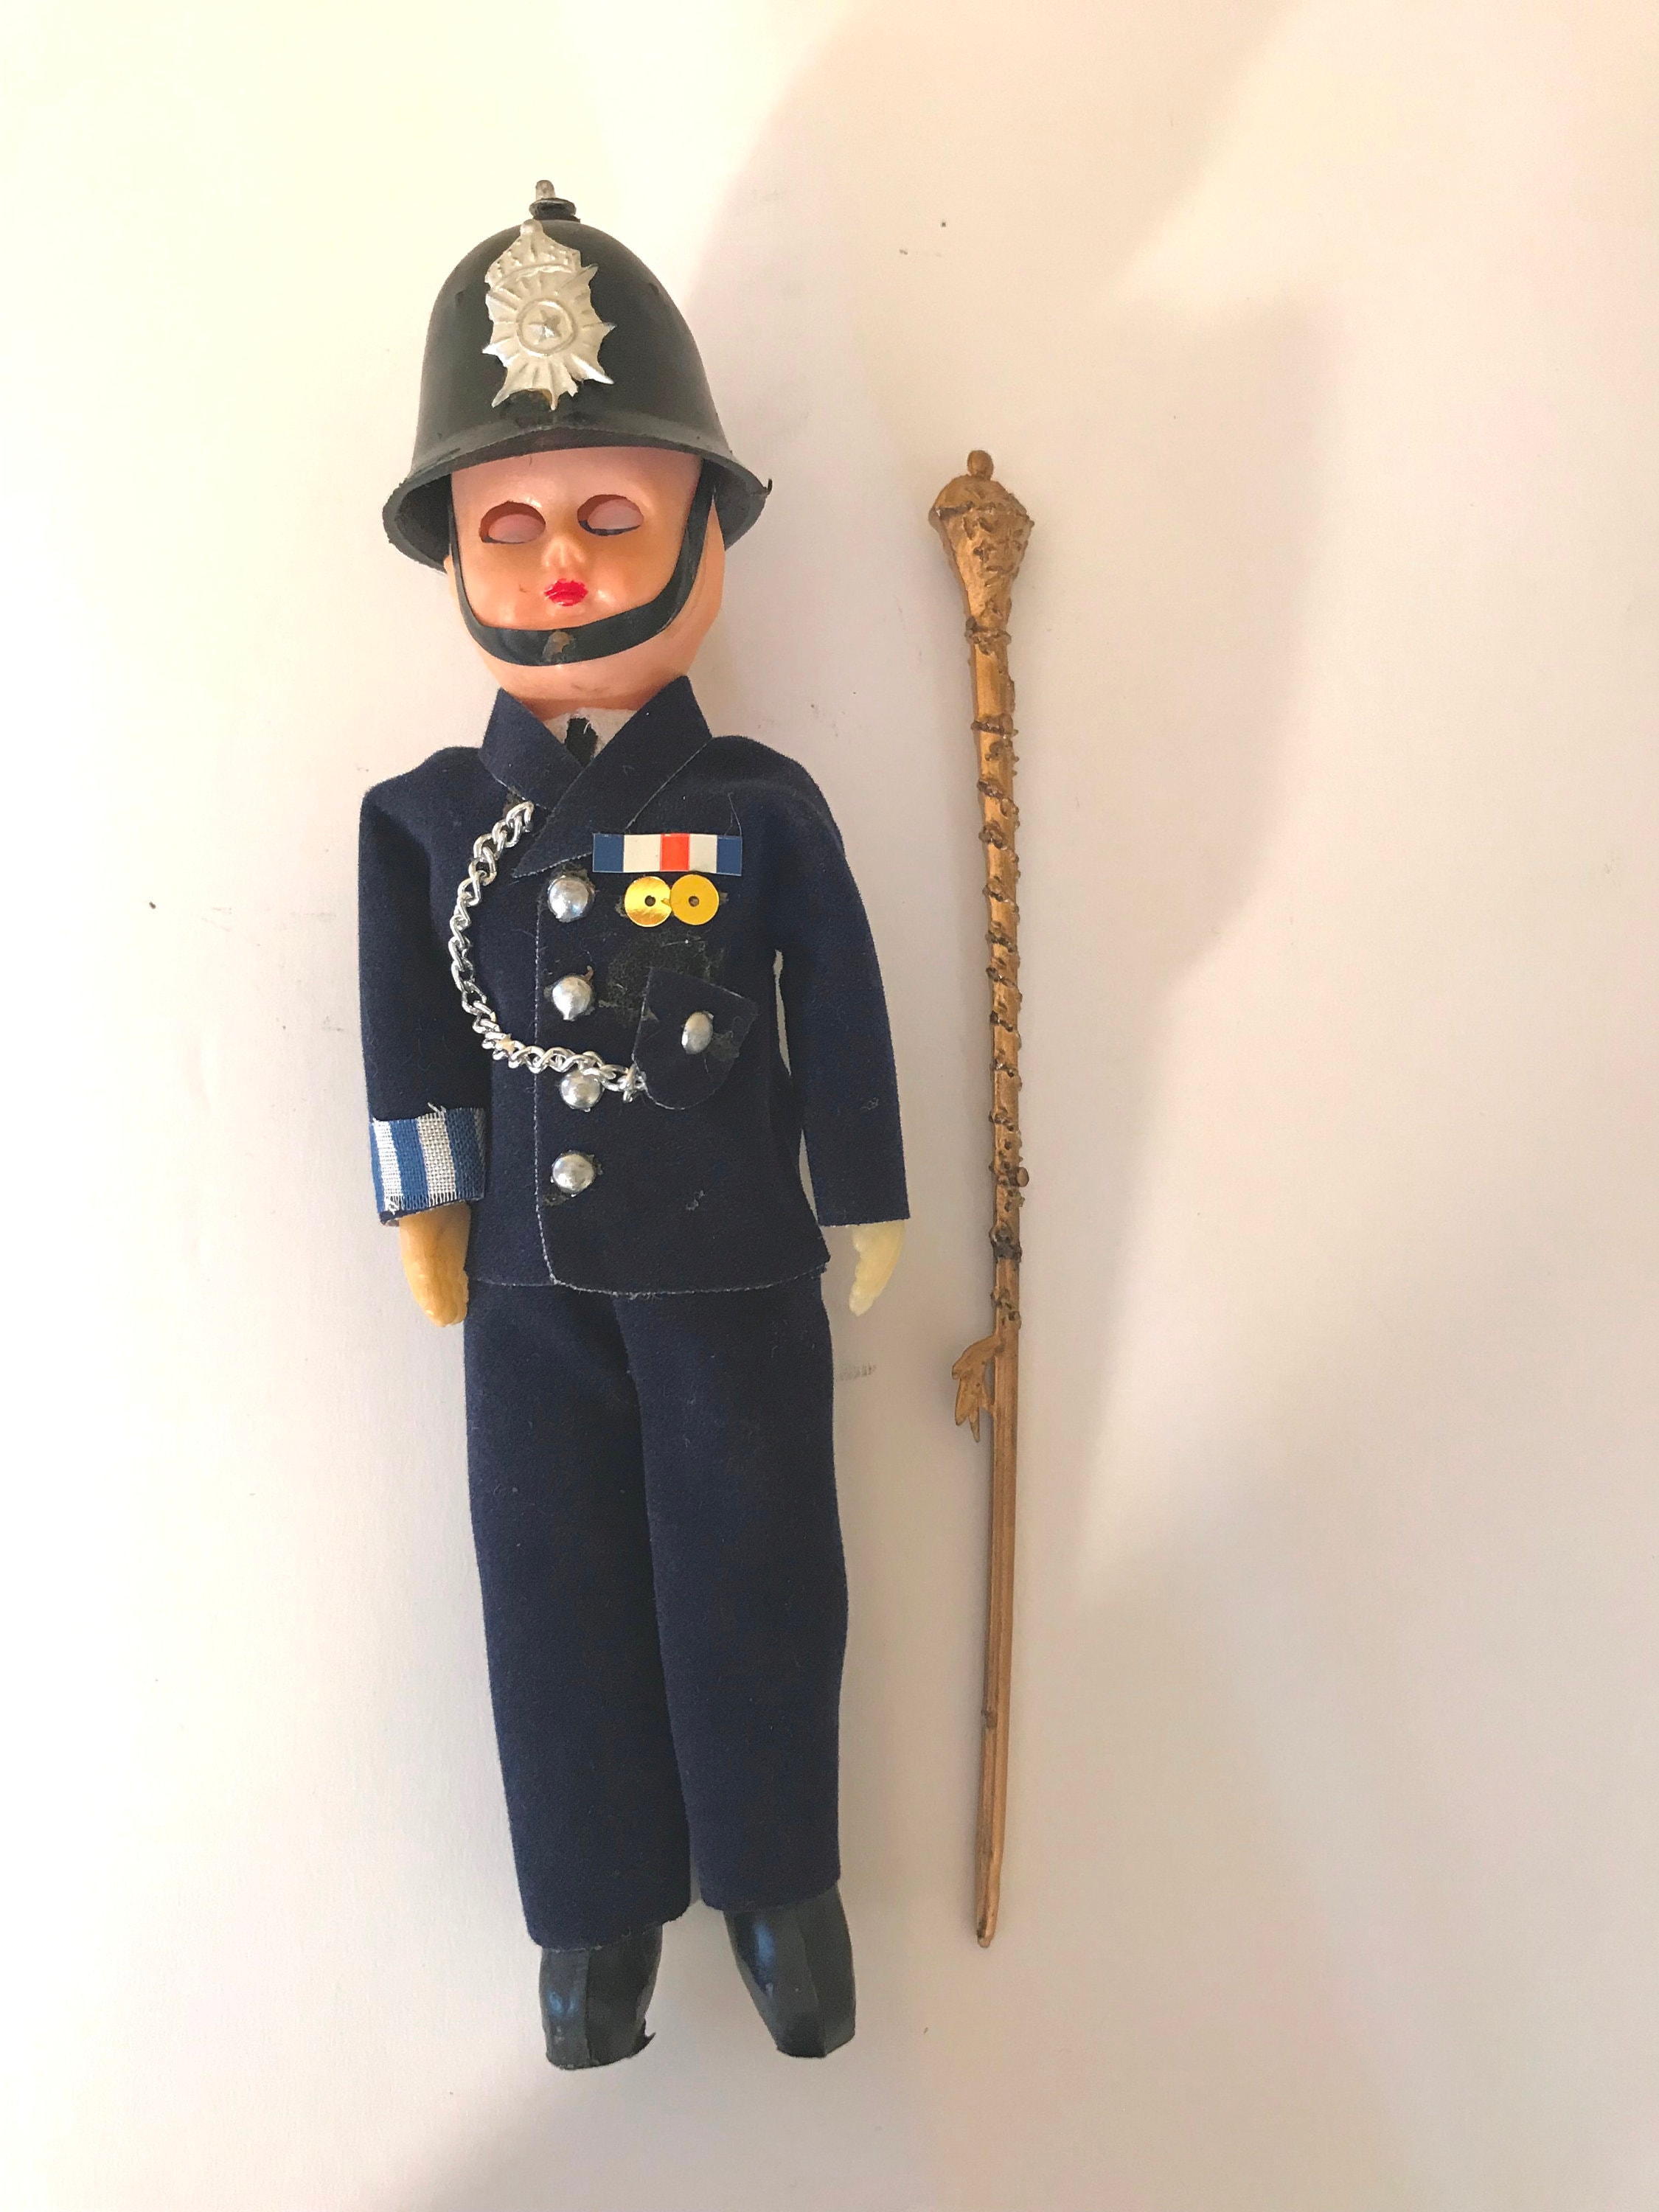 1986 Britains Hand Painted Die Cast Model Policeman//Bobby